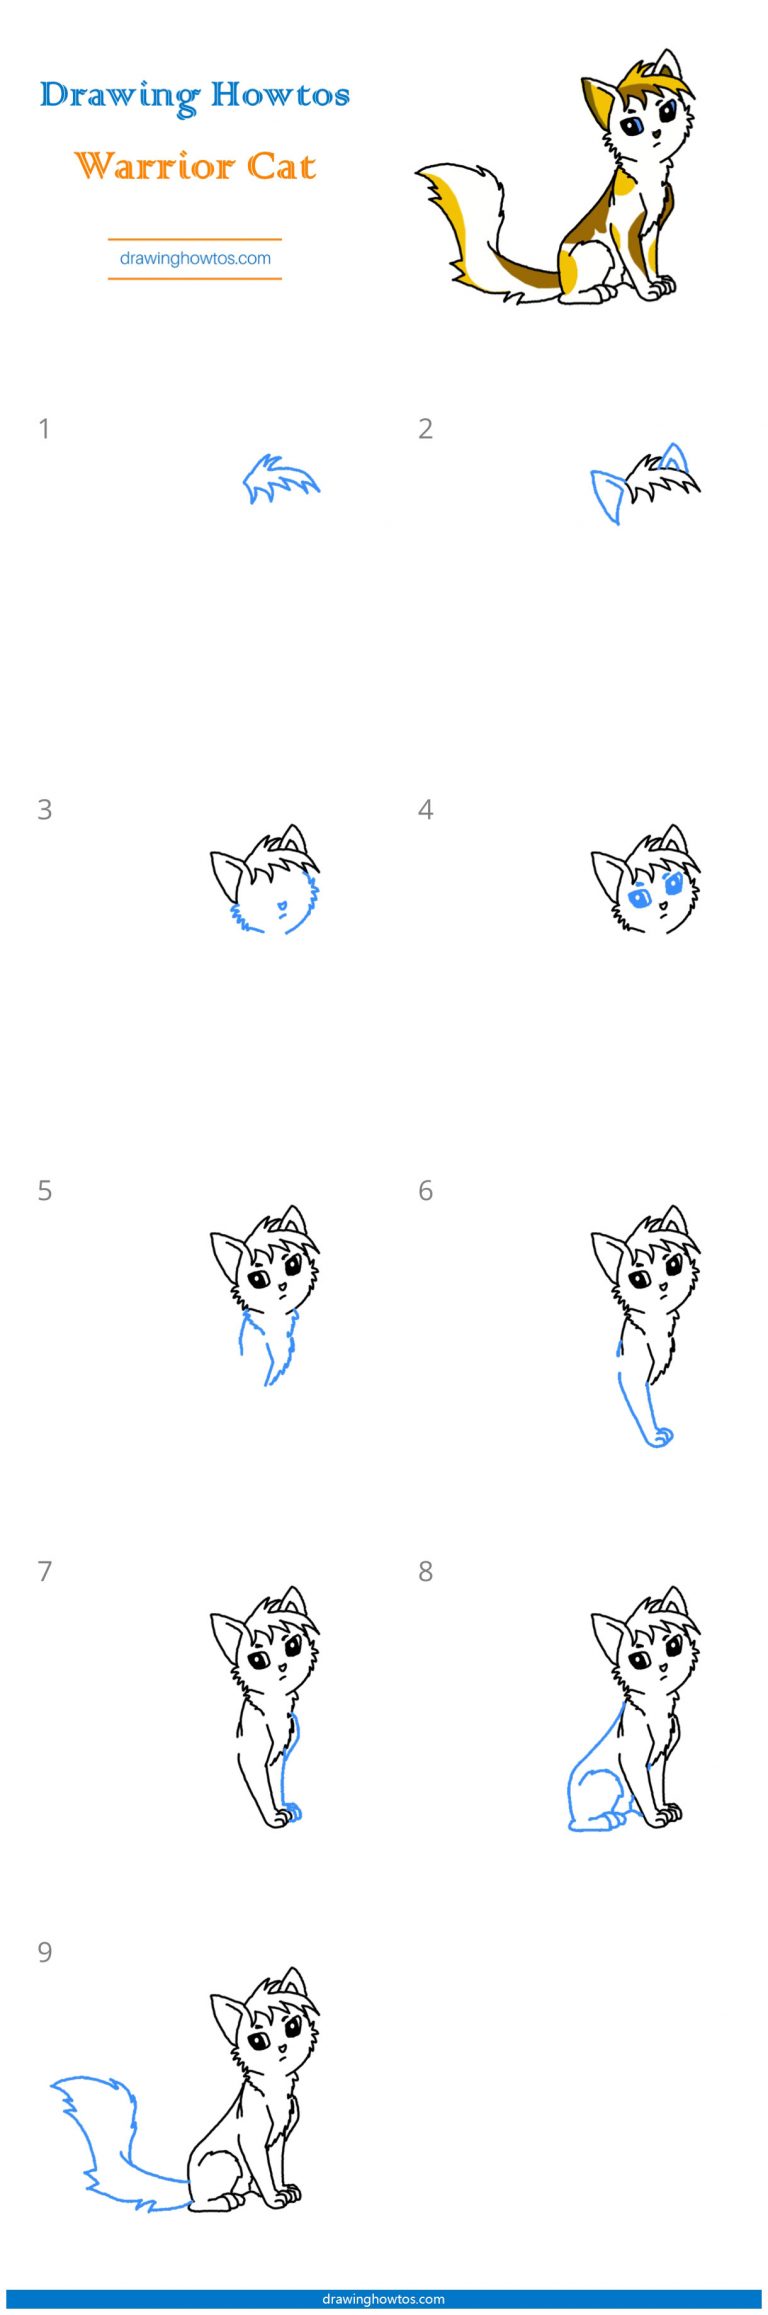 How to Draw a Warrior Cat - Step by Step Easy Drawing Guides - Drawing